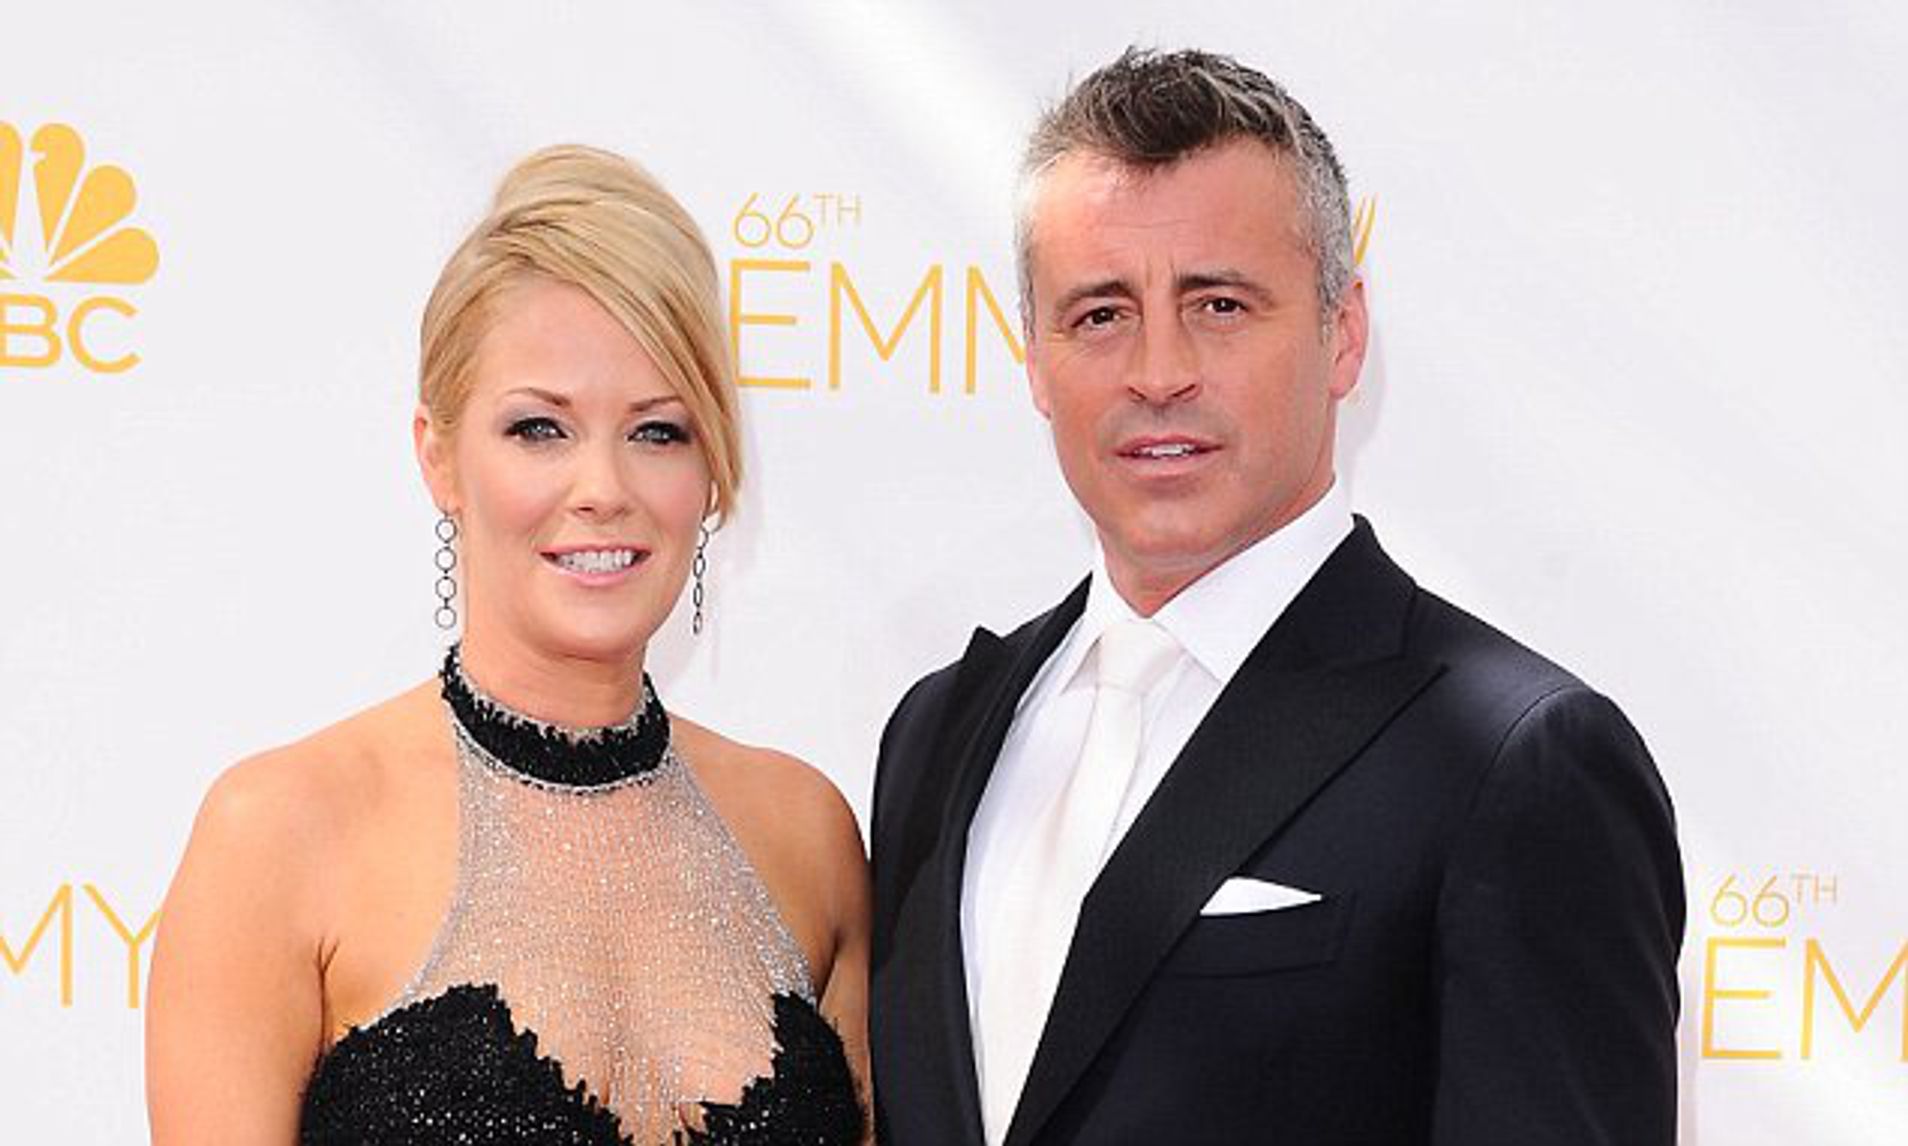 Andrea Anders had an eight-year relationship with Matt LeBlanc. 